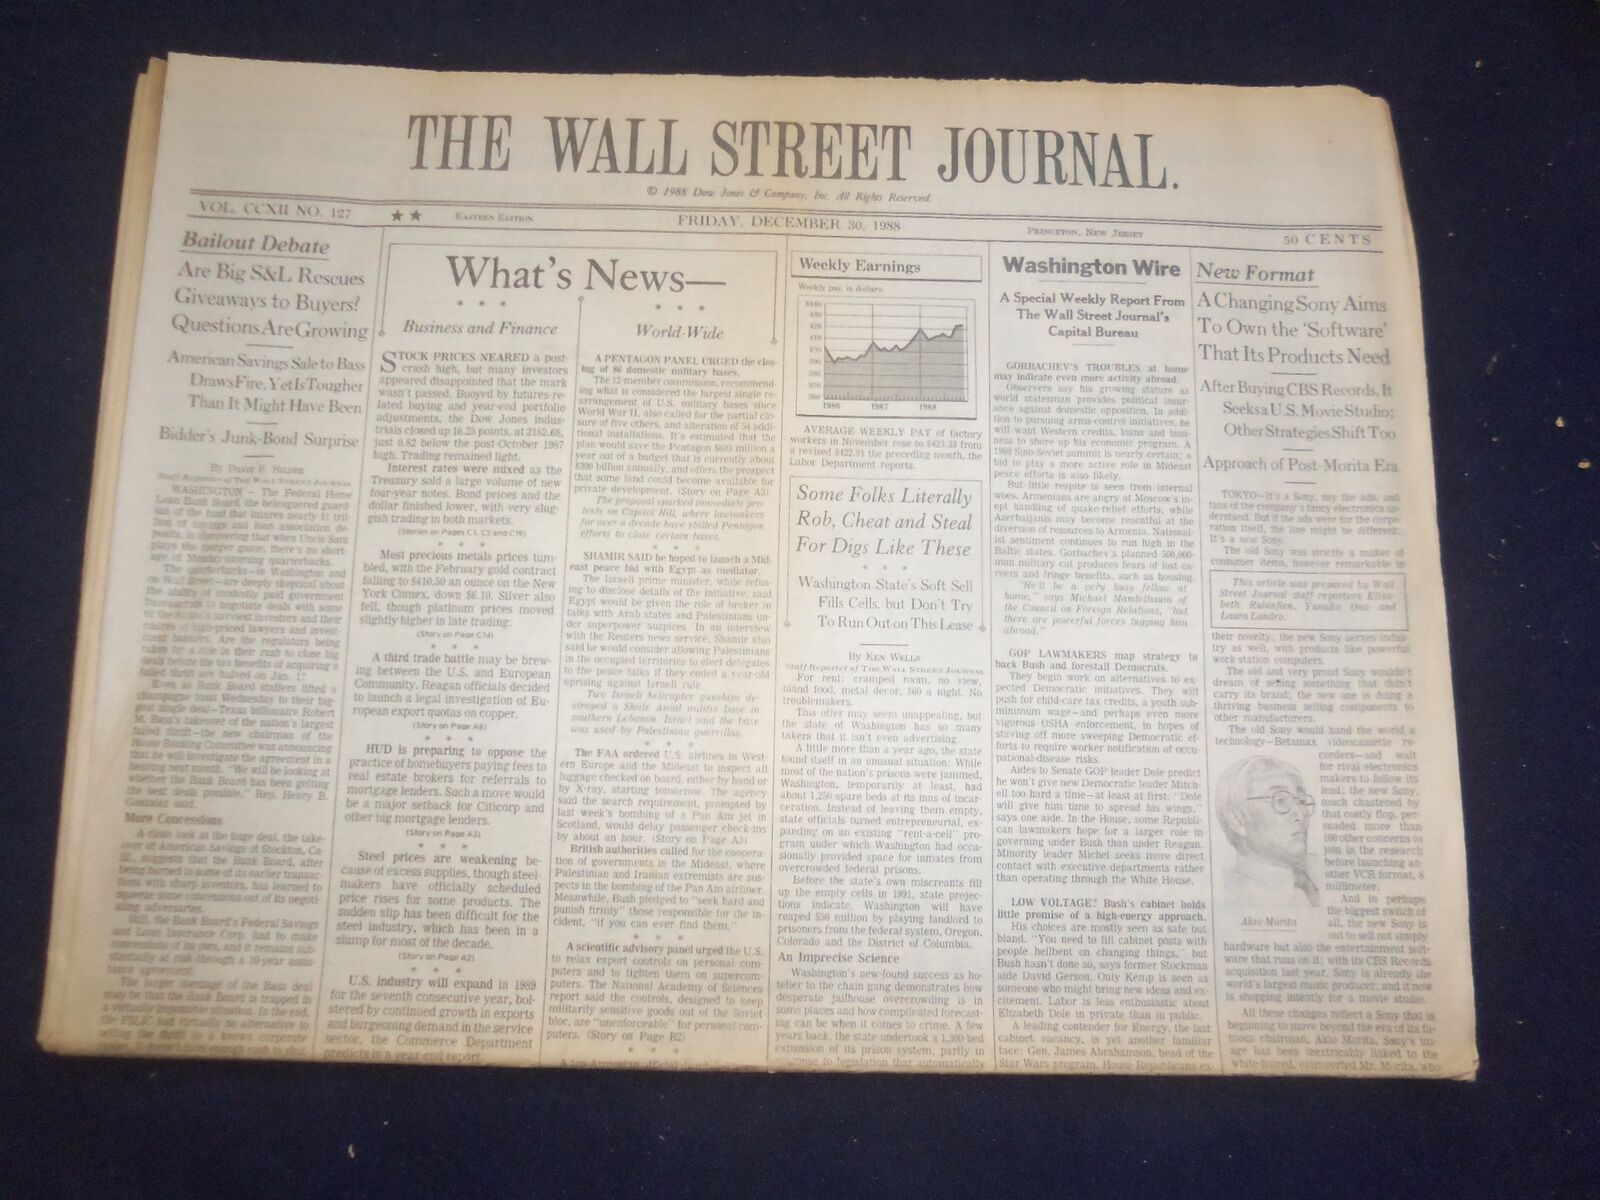 1988 DEC 30 THE WALL STREET JOURNAL - CHANGING SONY TO OWN ITS SOFTWARE - WJ 176